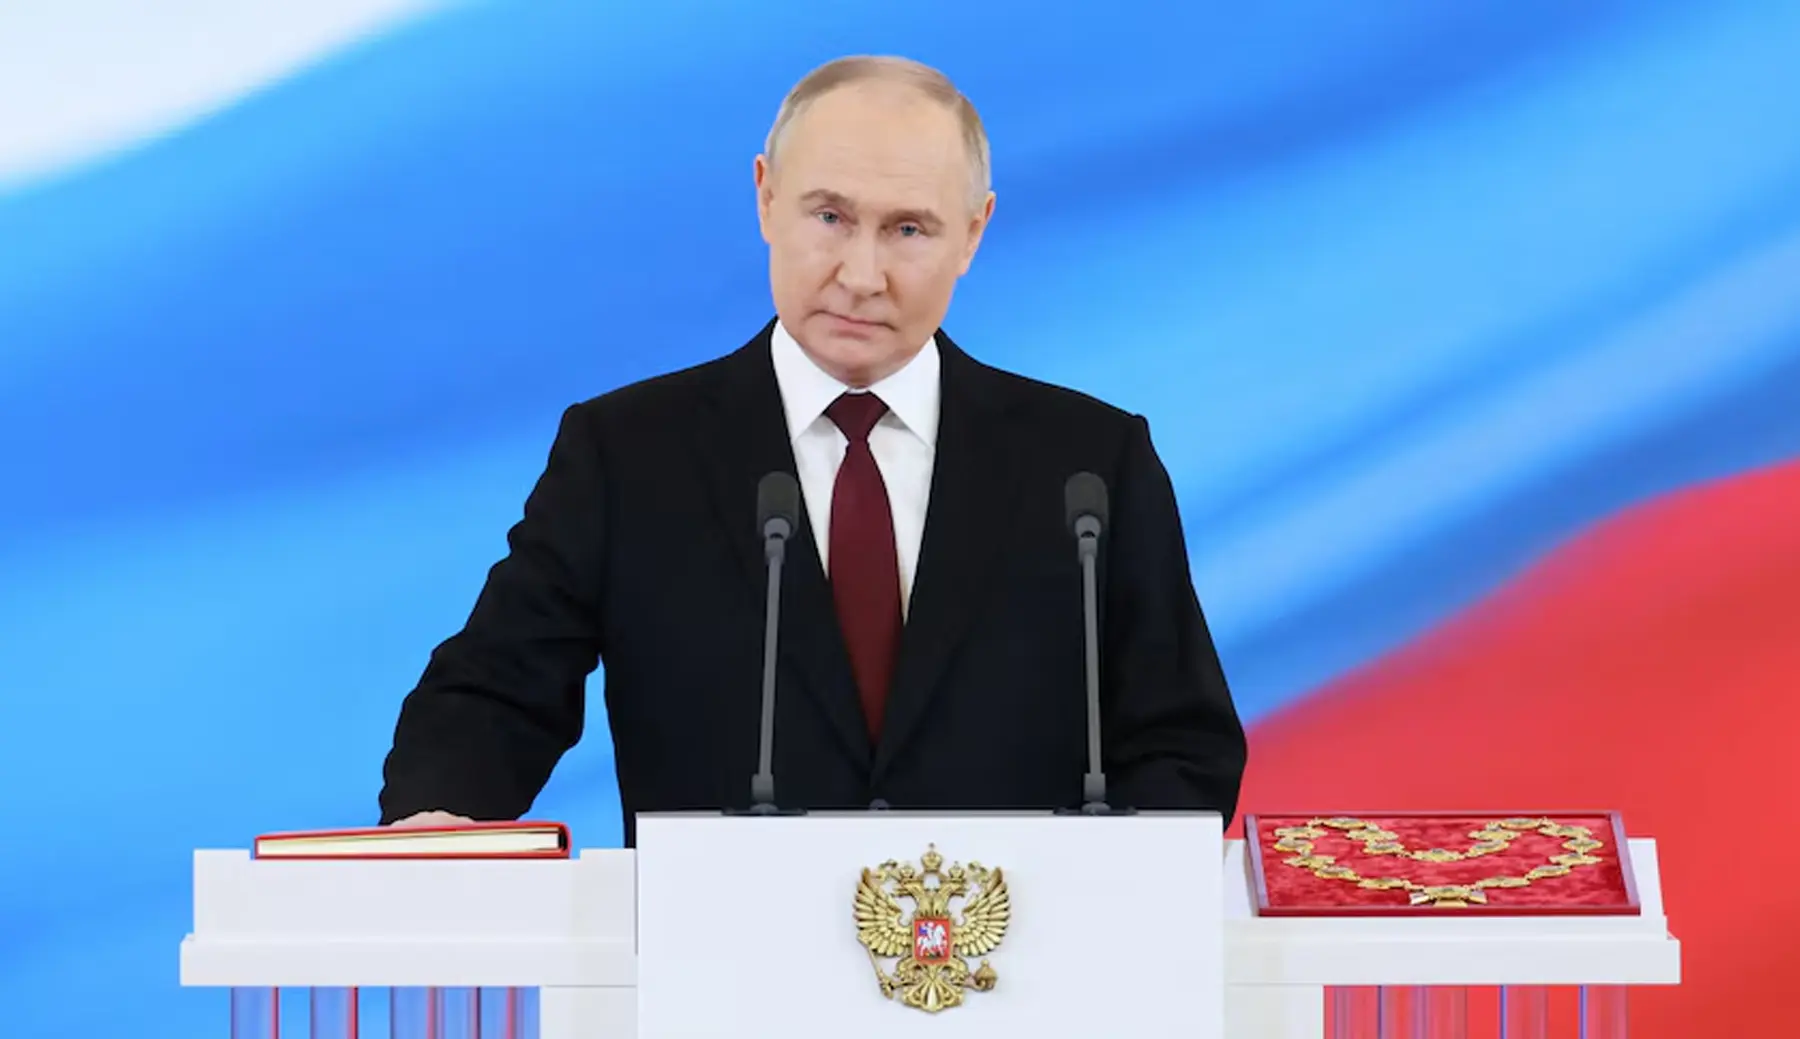 Vladimir Putin became Russia’s president for the fifth time after taking the oath.